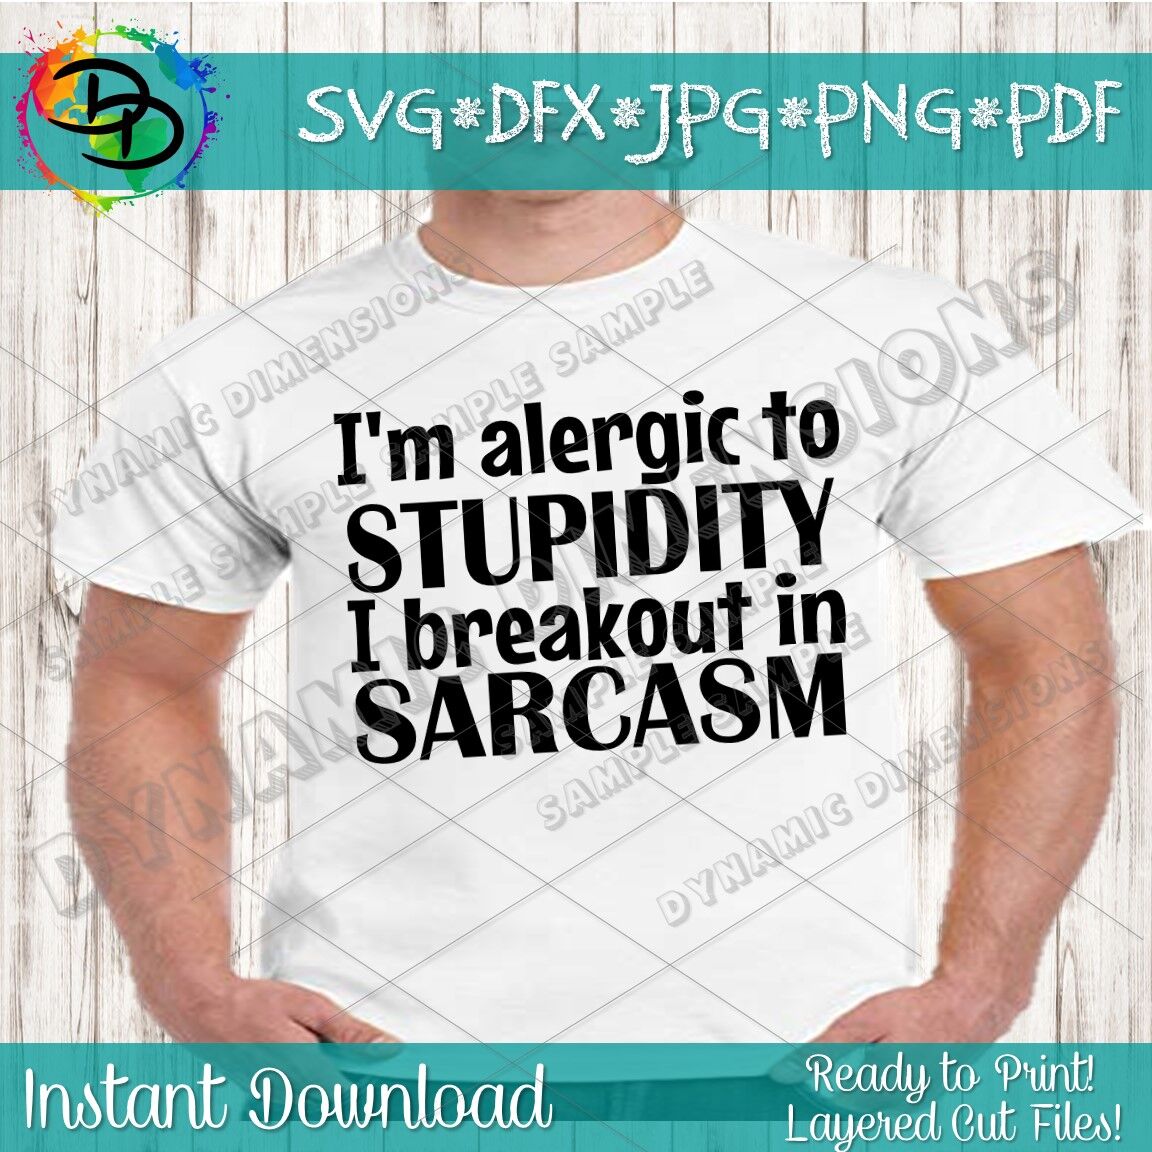 ori 3610852 6nyaw3nd1v3td934agjv6tn48m7c86cqdexxd3dj i 039 m allergic to stupidity i break out in sarcasm sarcasm shirt funn